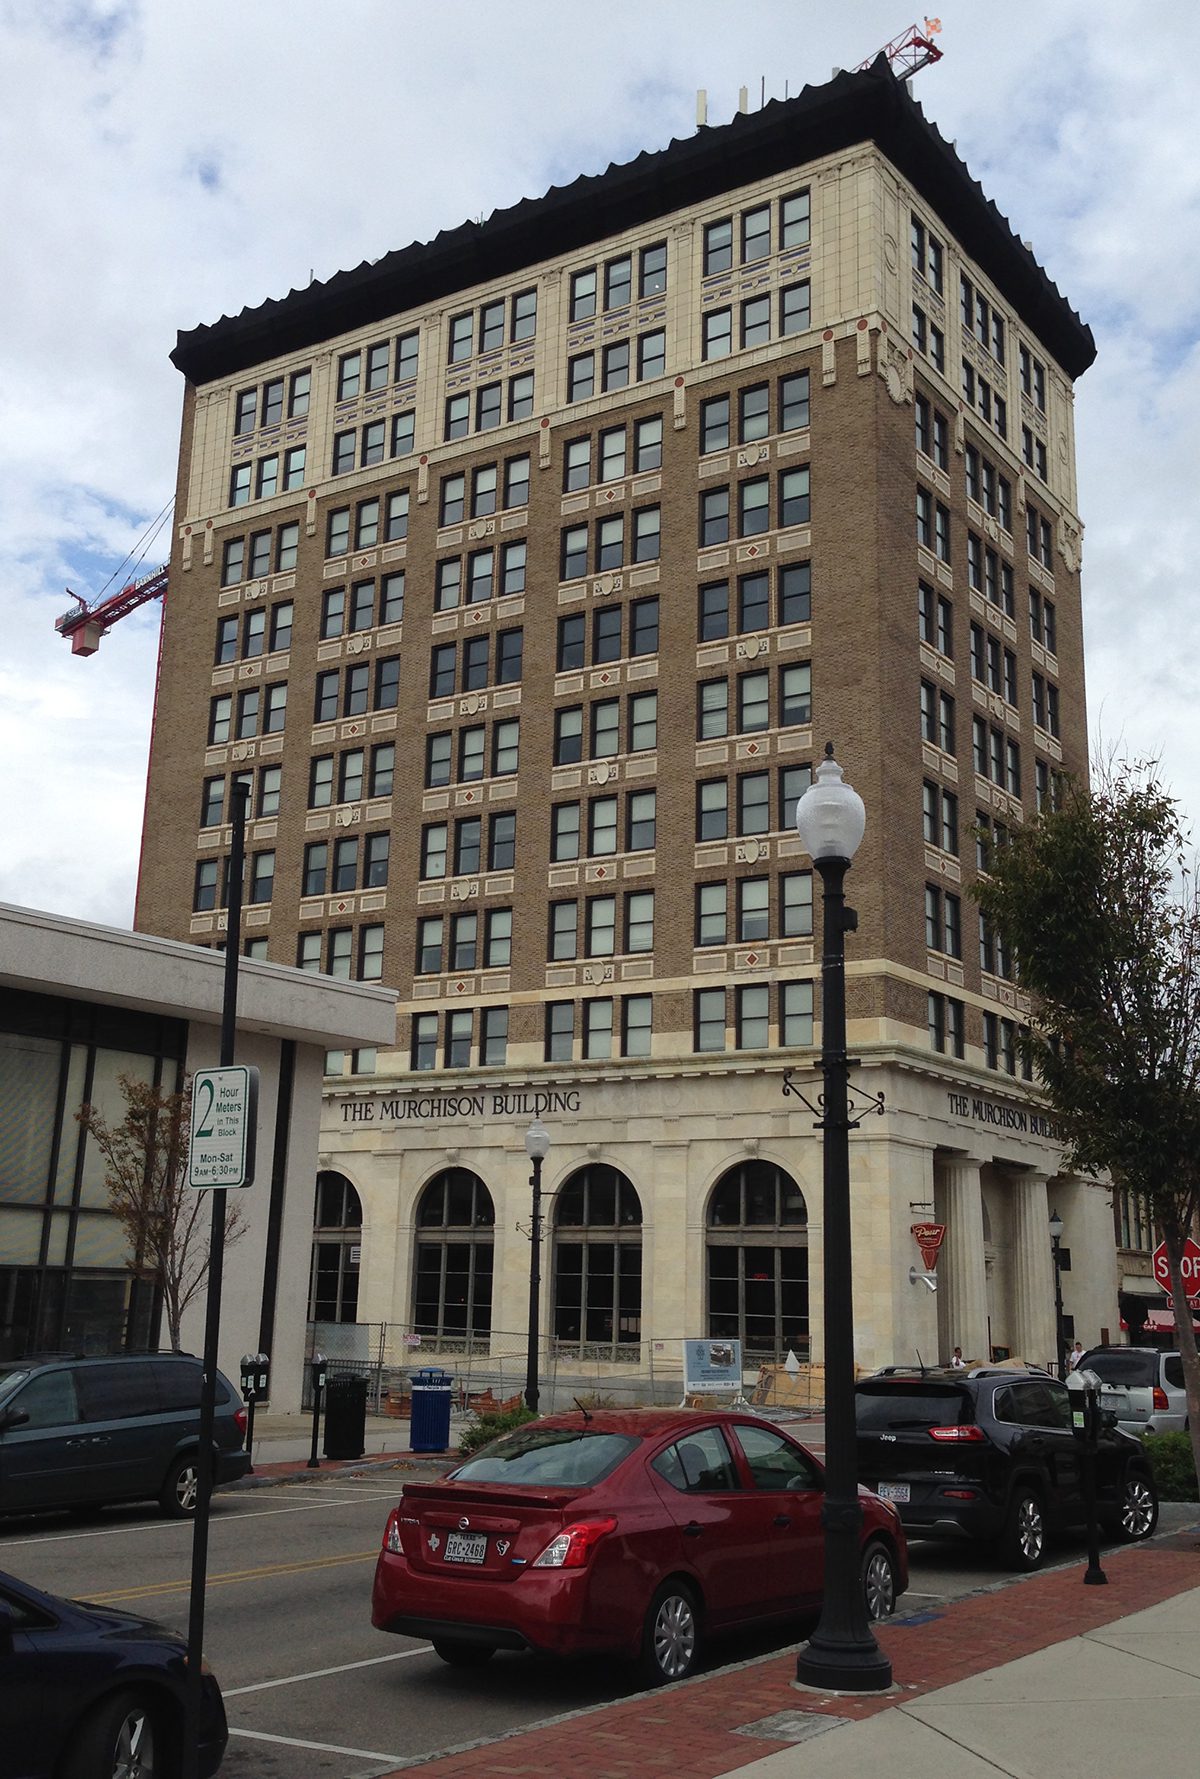 The Murchison Building at Front and Chestnut streets in Wilmington. Photo: Eric Medlin